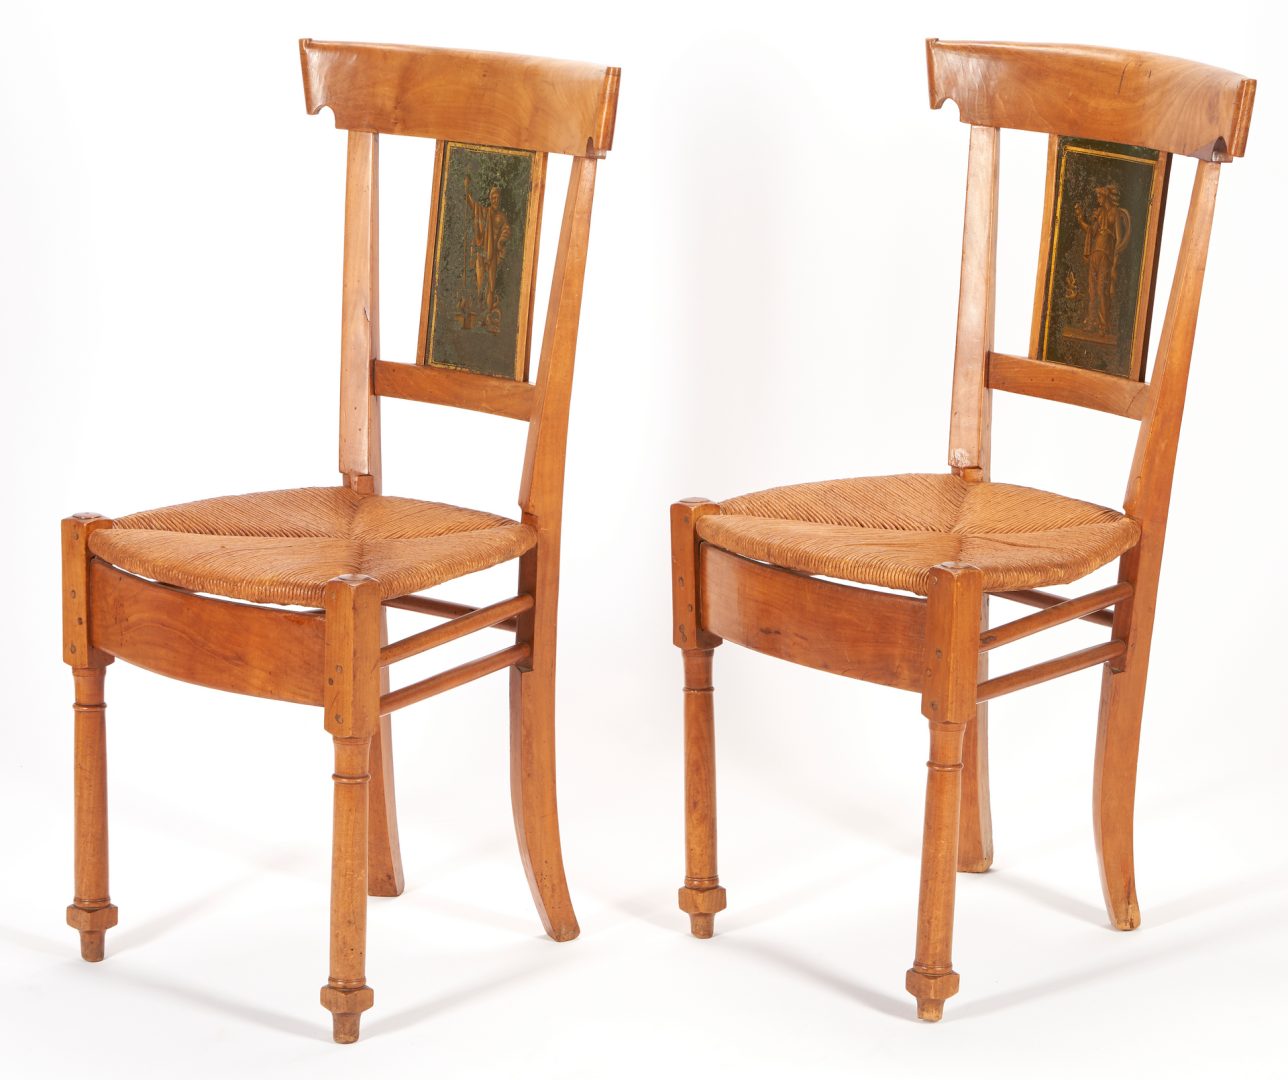 Lot 280: Group of 6 European Chairs w/ Classical Motifs